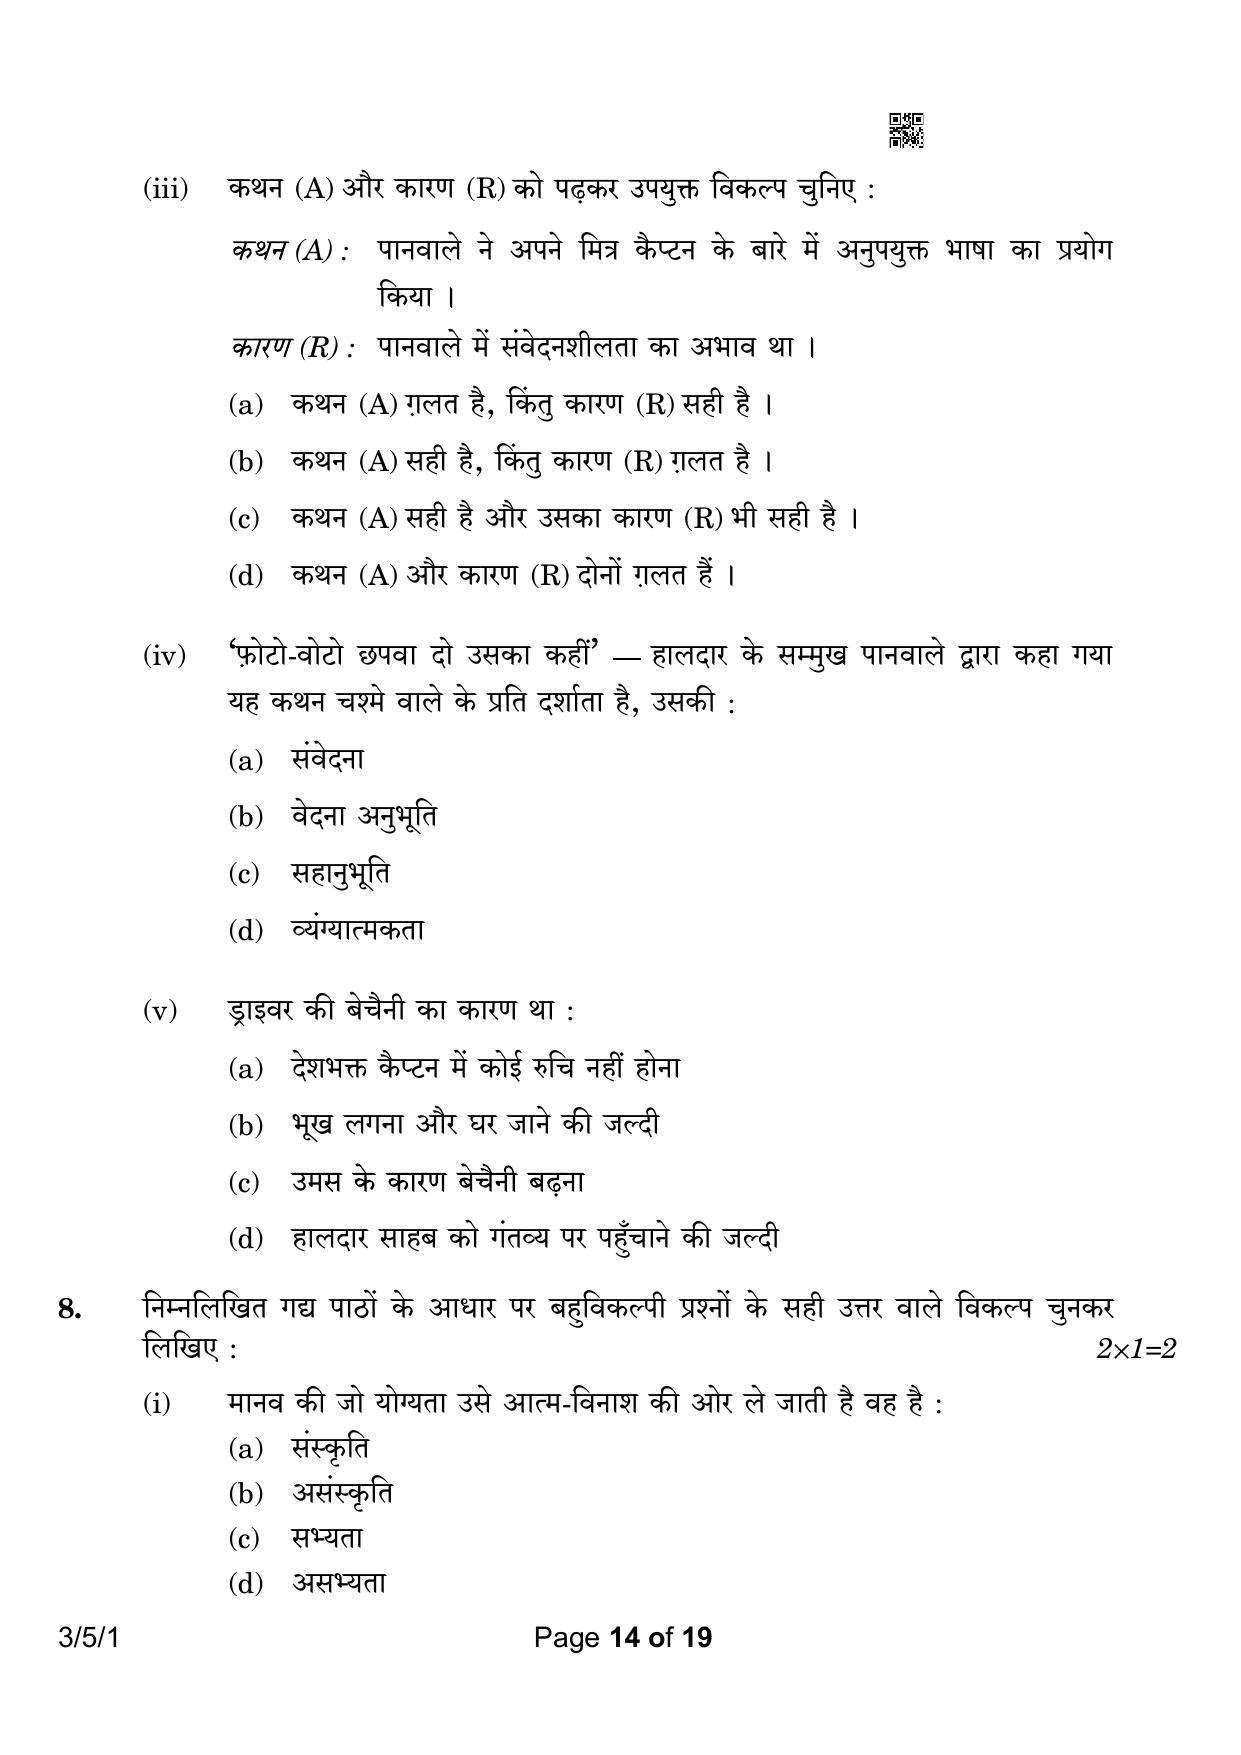 CBSE Class 10 3-5-1 Hindi A 2023 Question Paper - Page 14